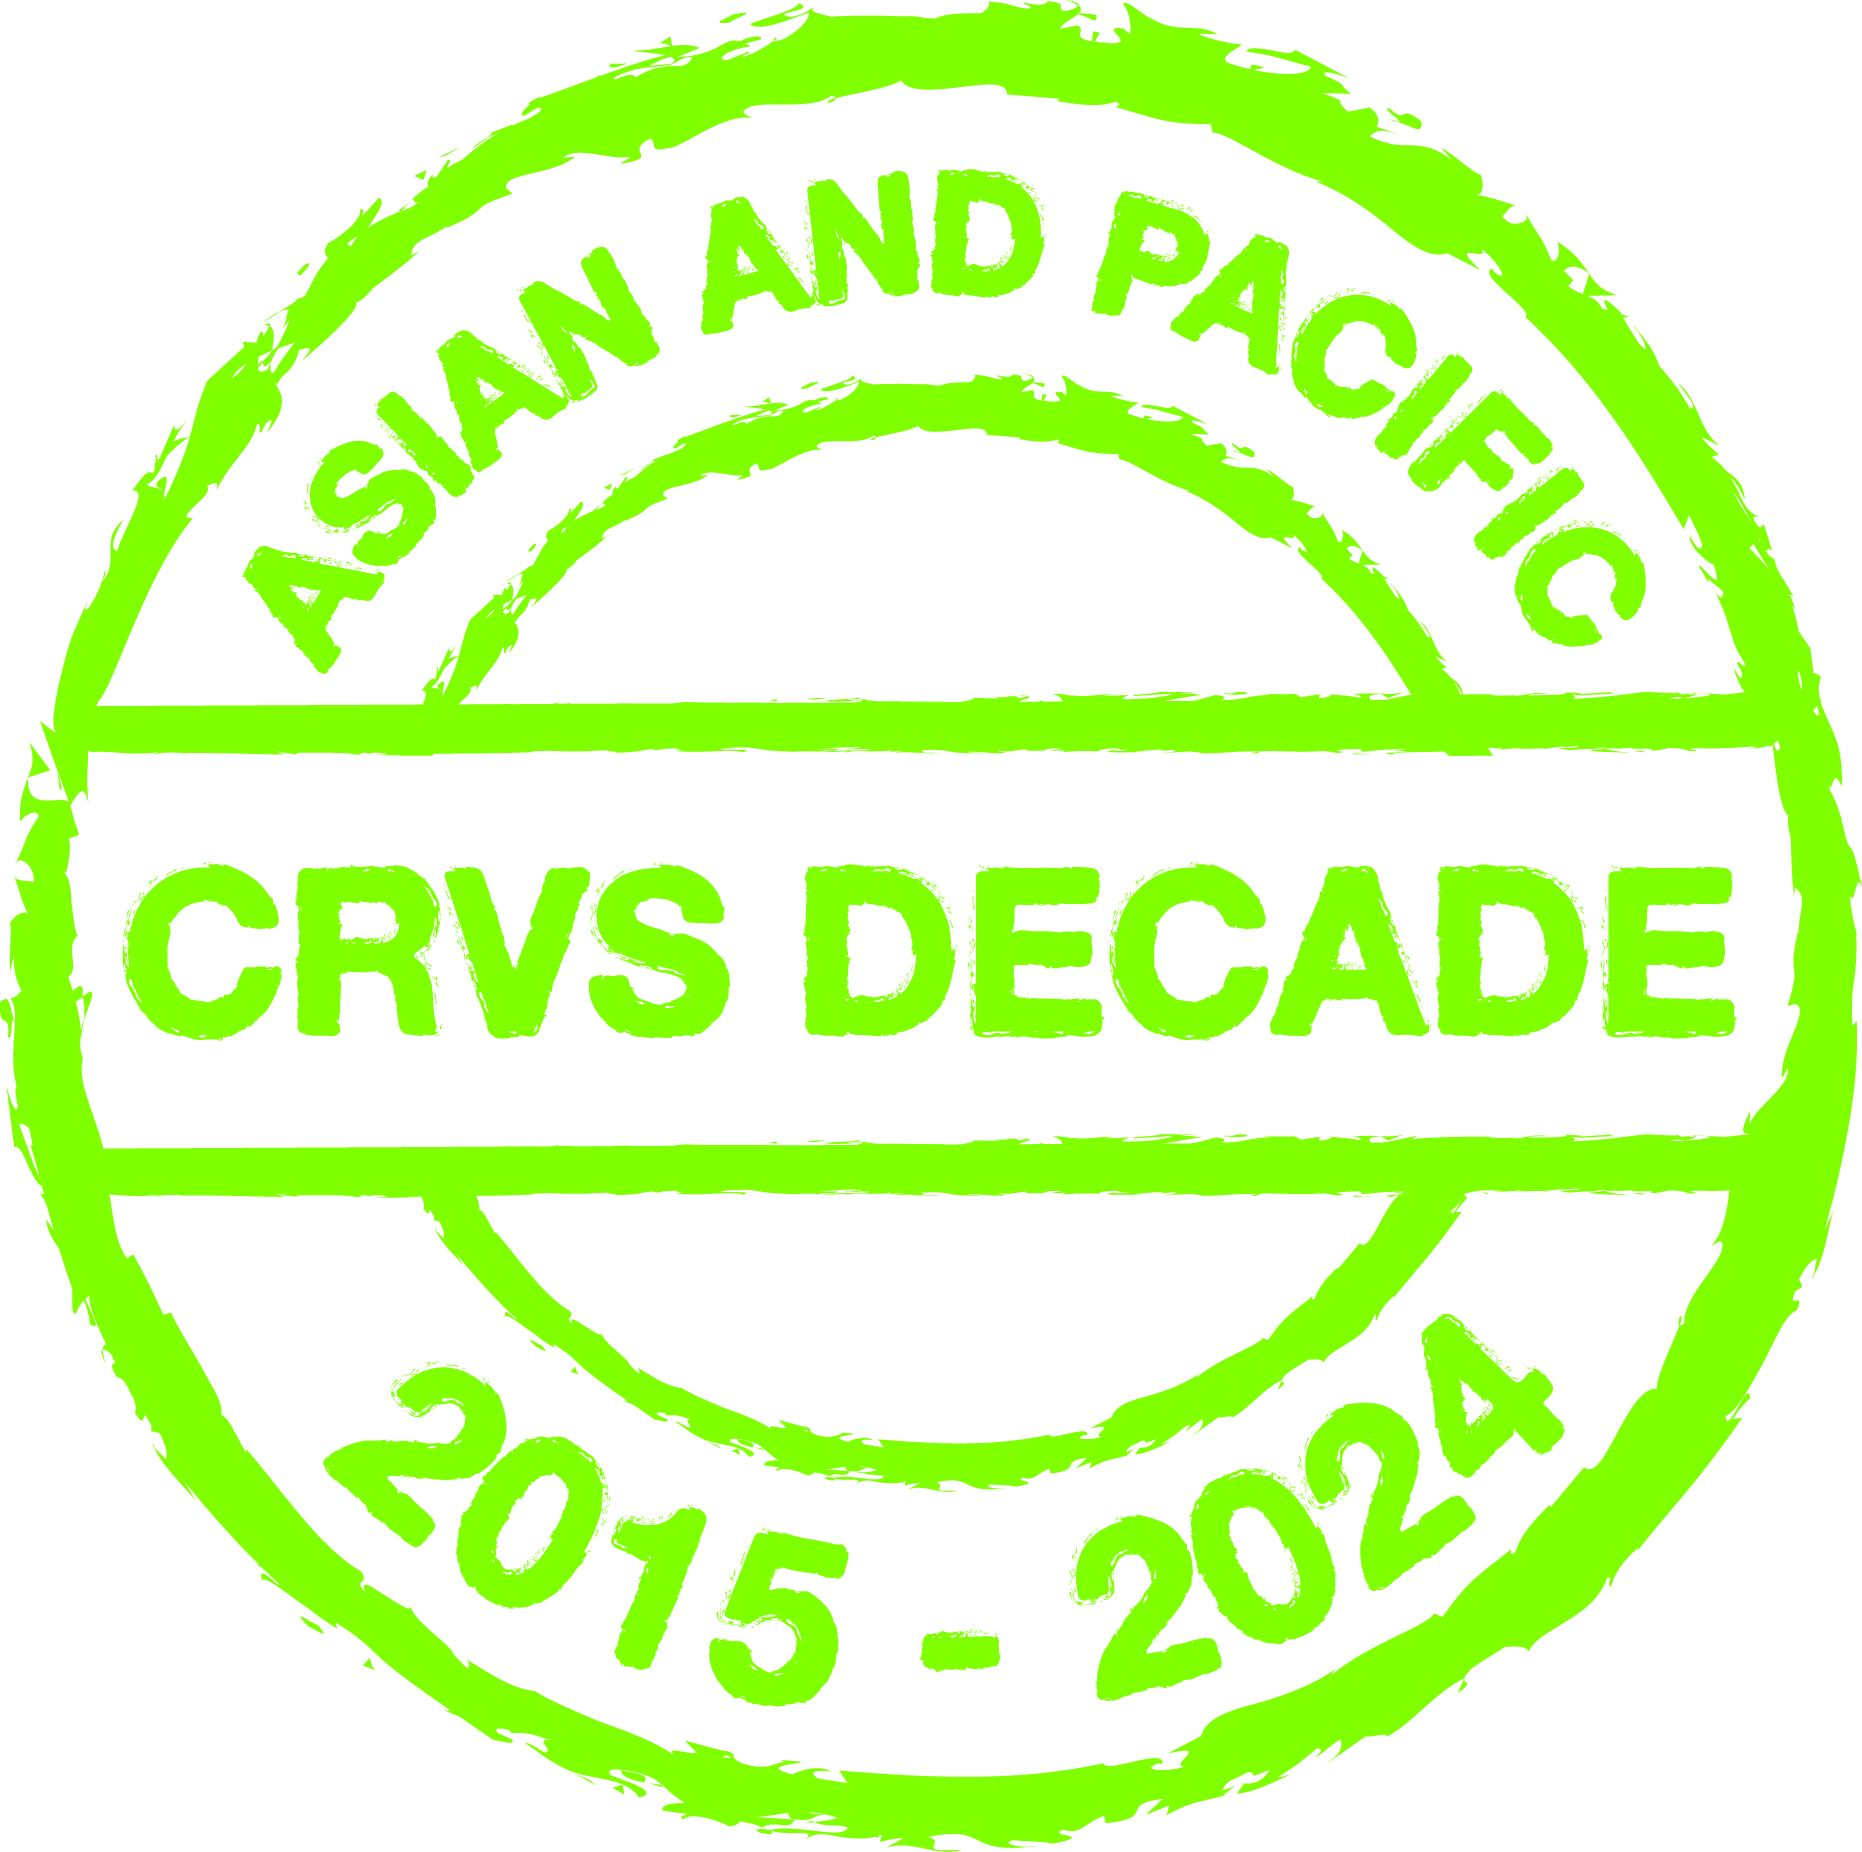 United States of America CRVS Decade (2015-2024) Midterm Questionnaire